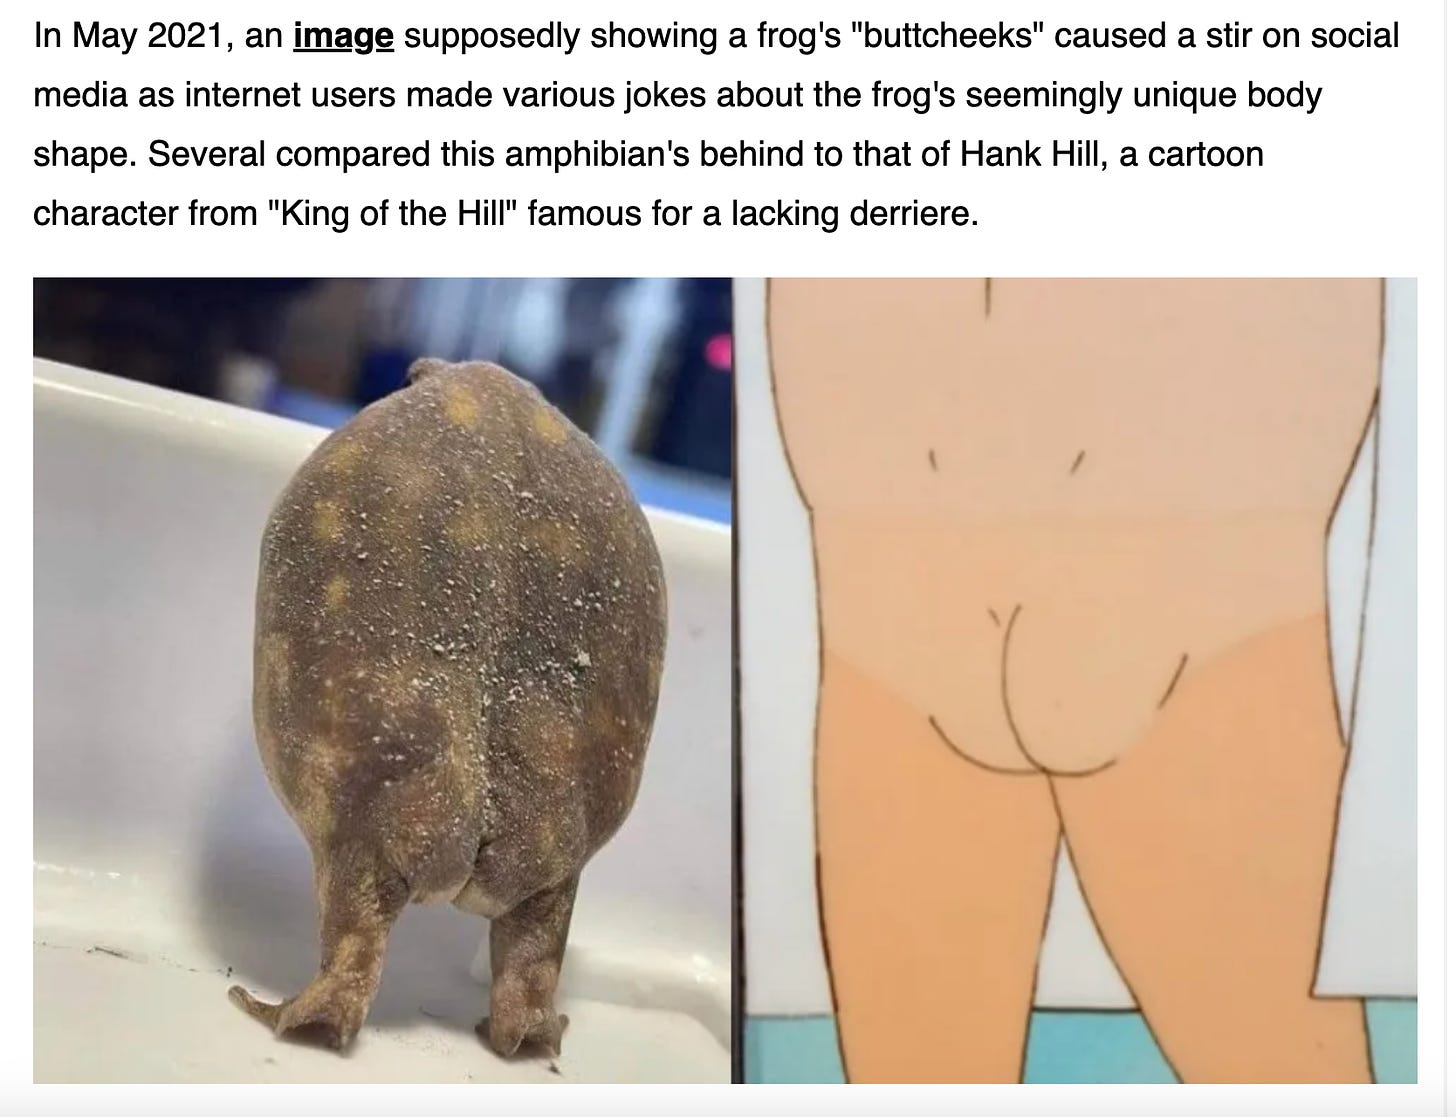 Screenshot from Snopes with side-by-side frog small butt and Hank Hill small butt images